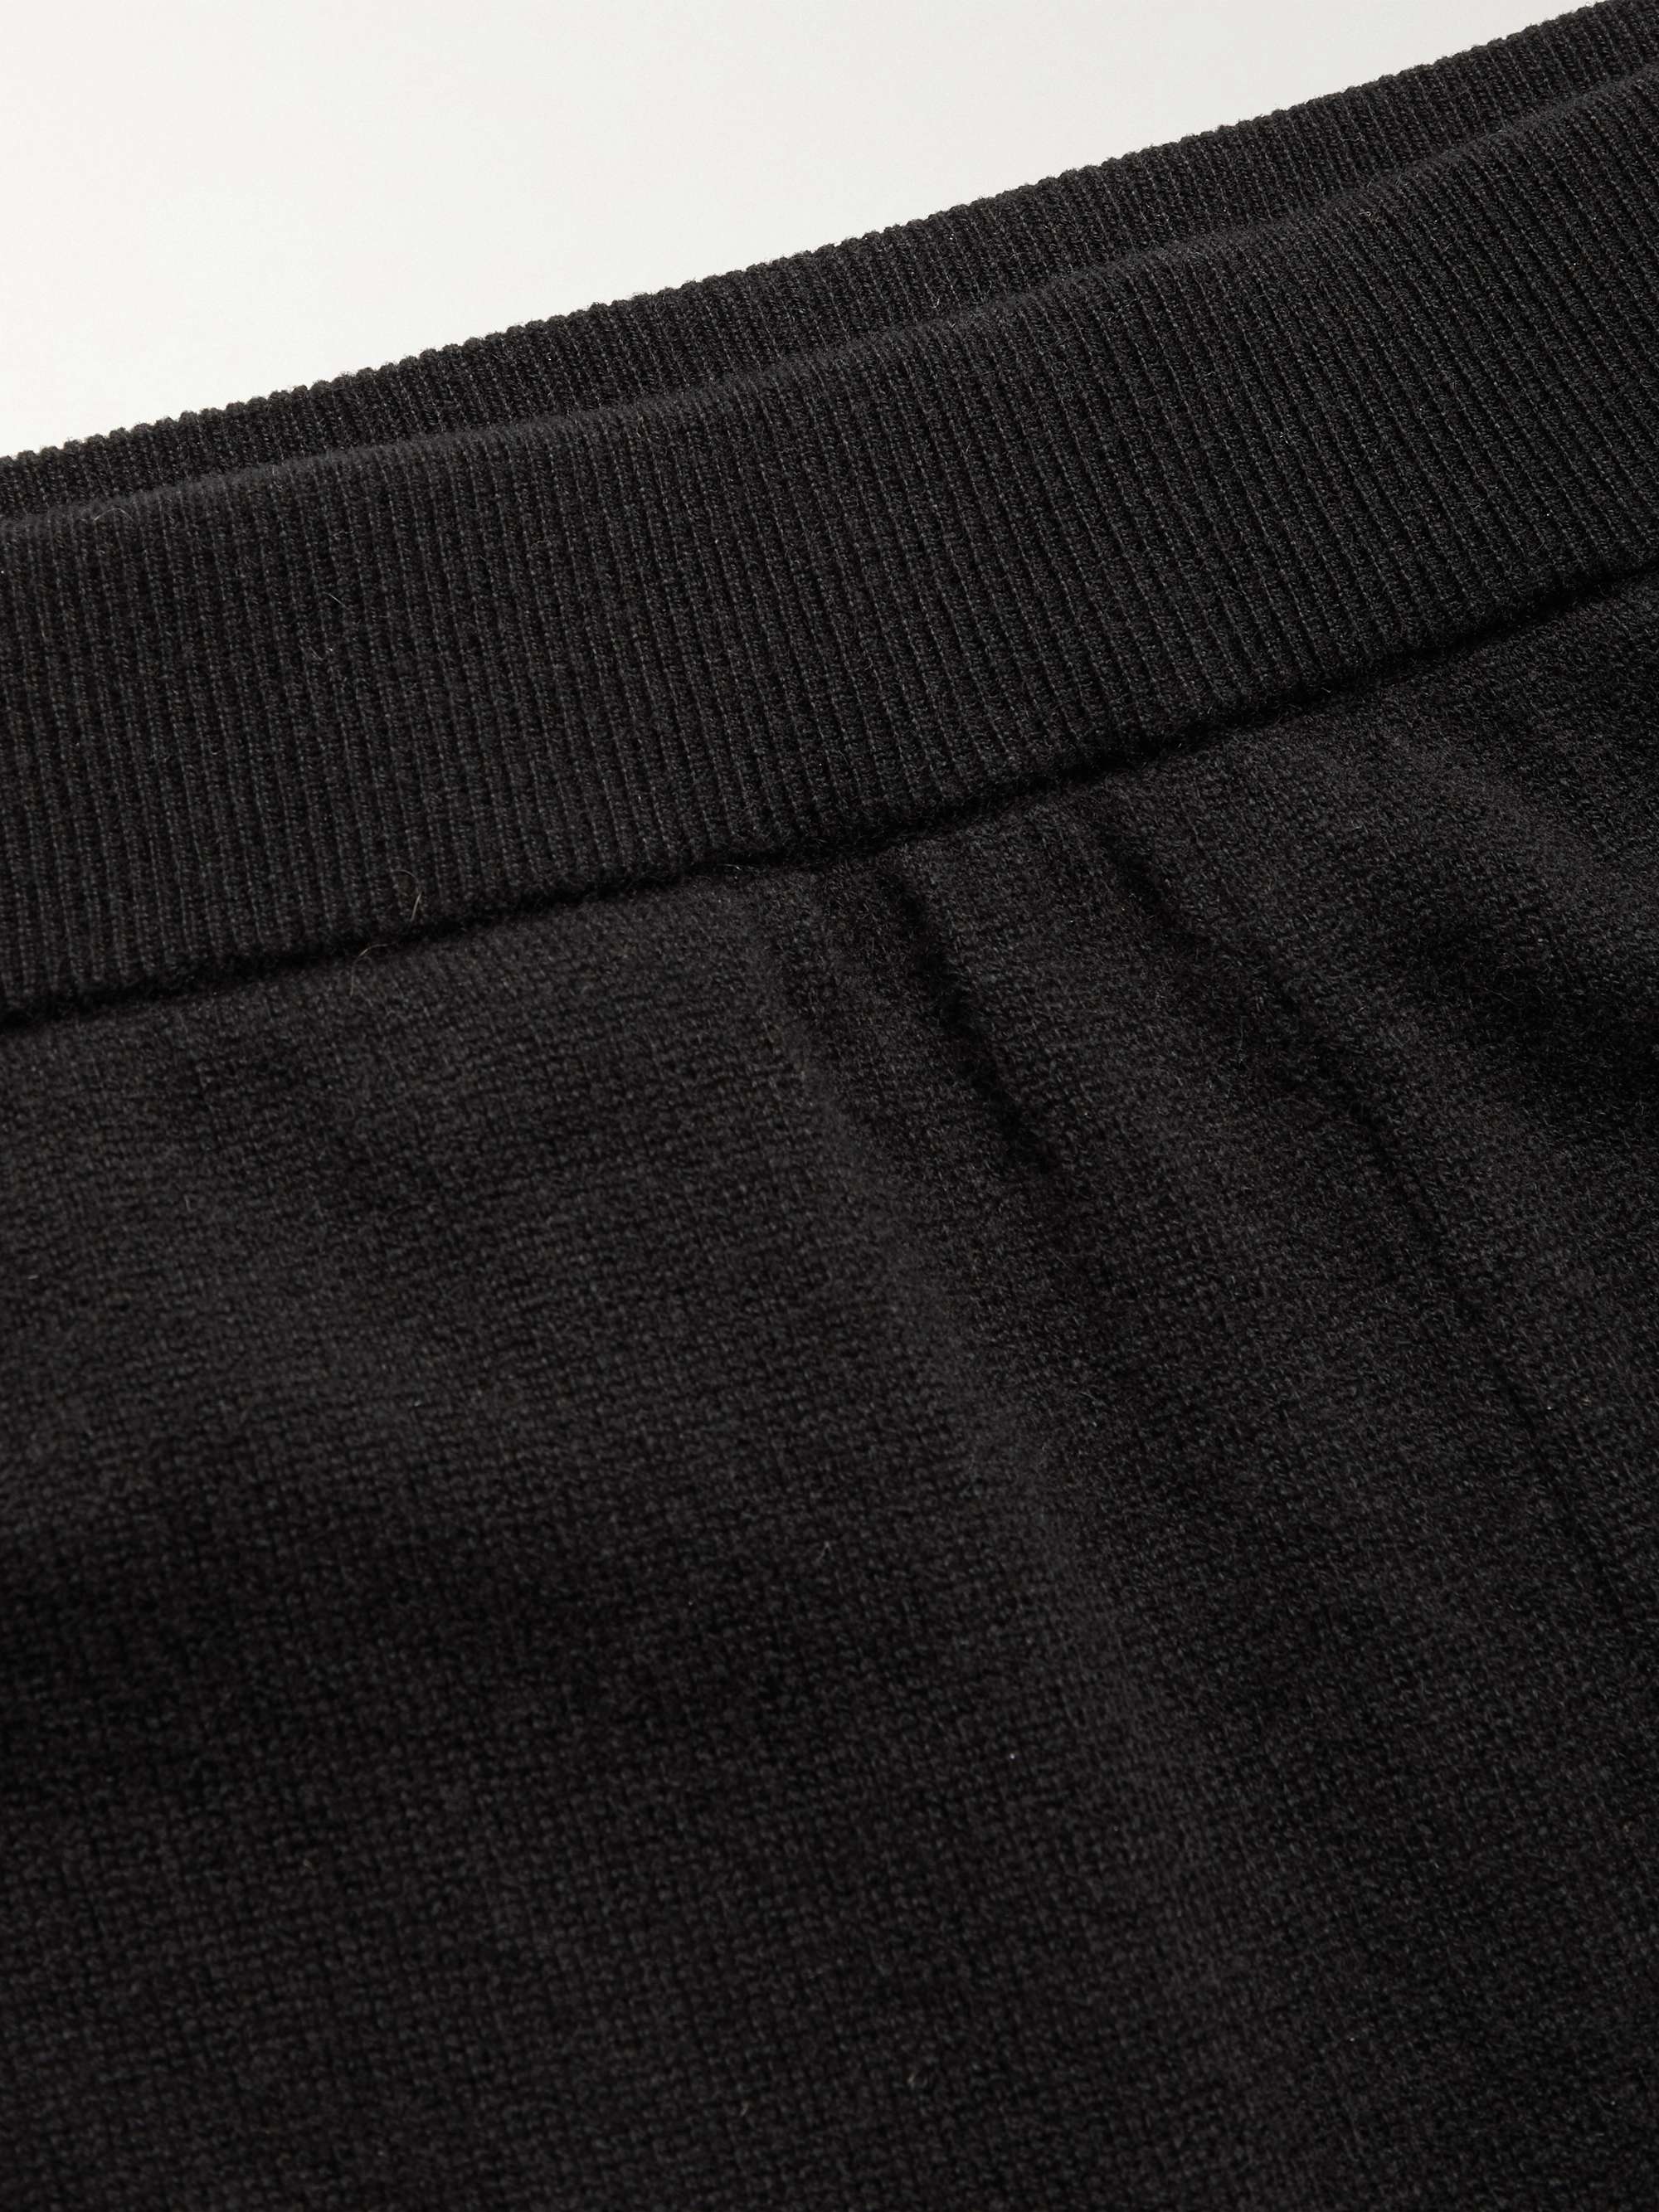 THE ROW Olivier Tapered Cashmere Sweatpants